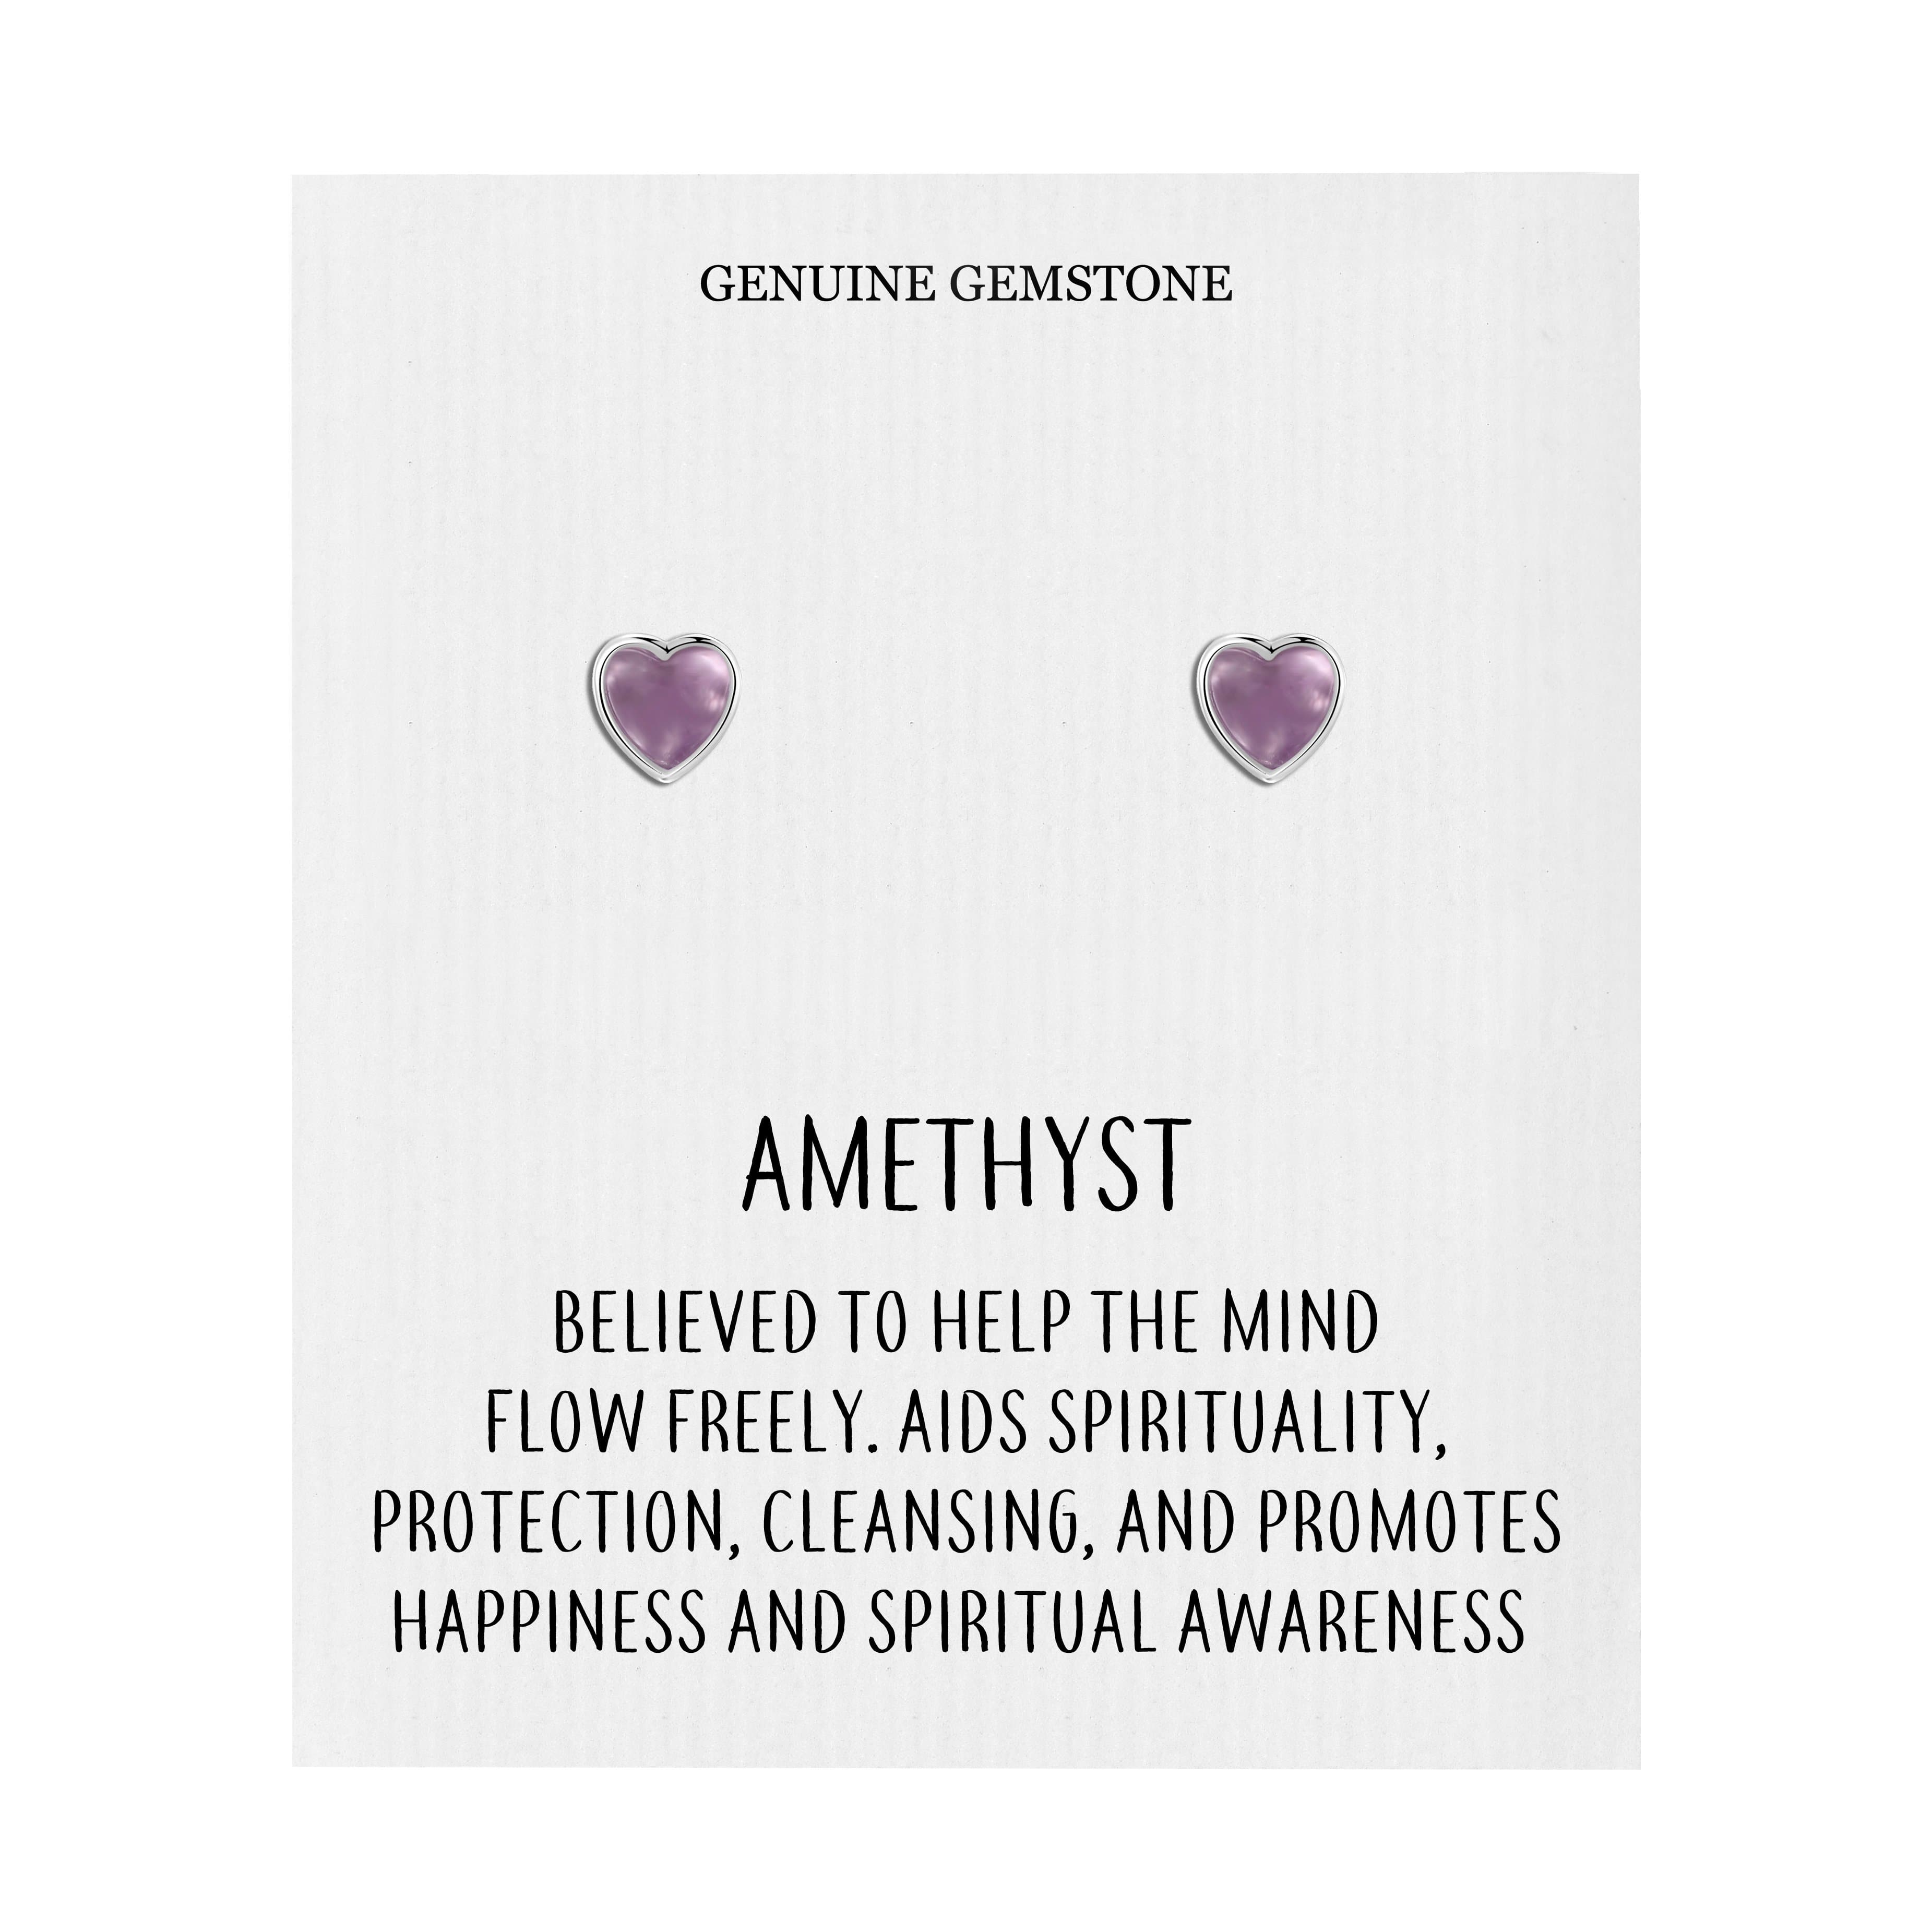 Amethyst Heart Stud Earrings with Quote Card by Philip Jones Jewellery